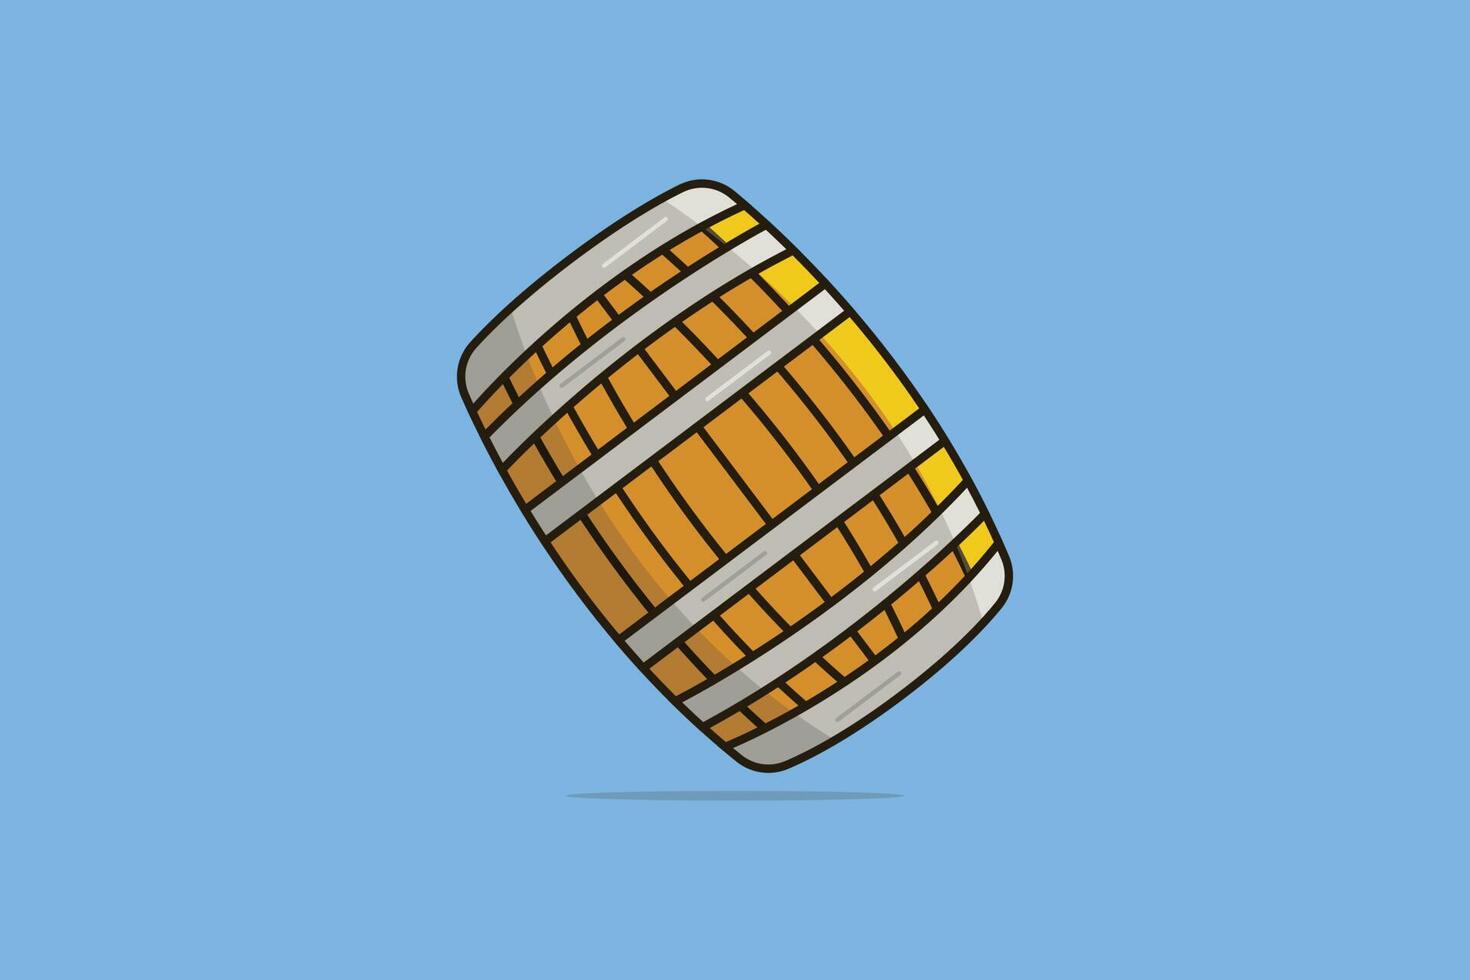 Wooden Barrel with Iron Rings vector illustration. Industry working object icon concept. Oil barrel container for liquid chemical products oil, fuel and gasoline vector design with shadow.